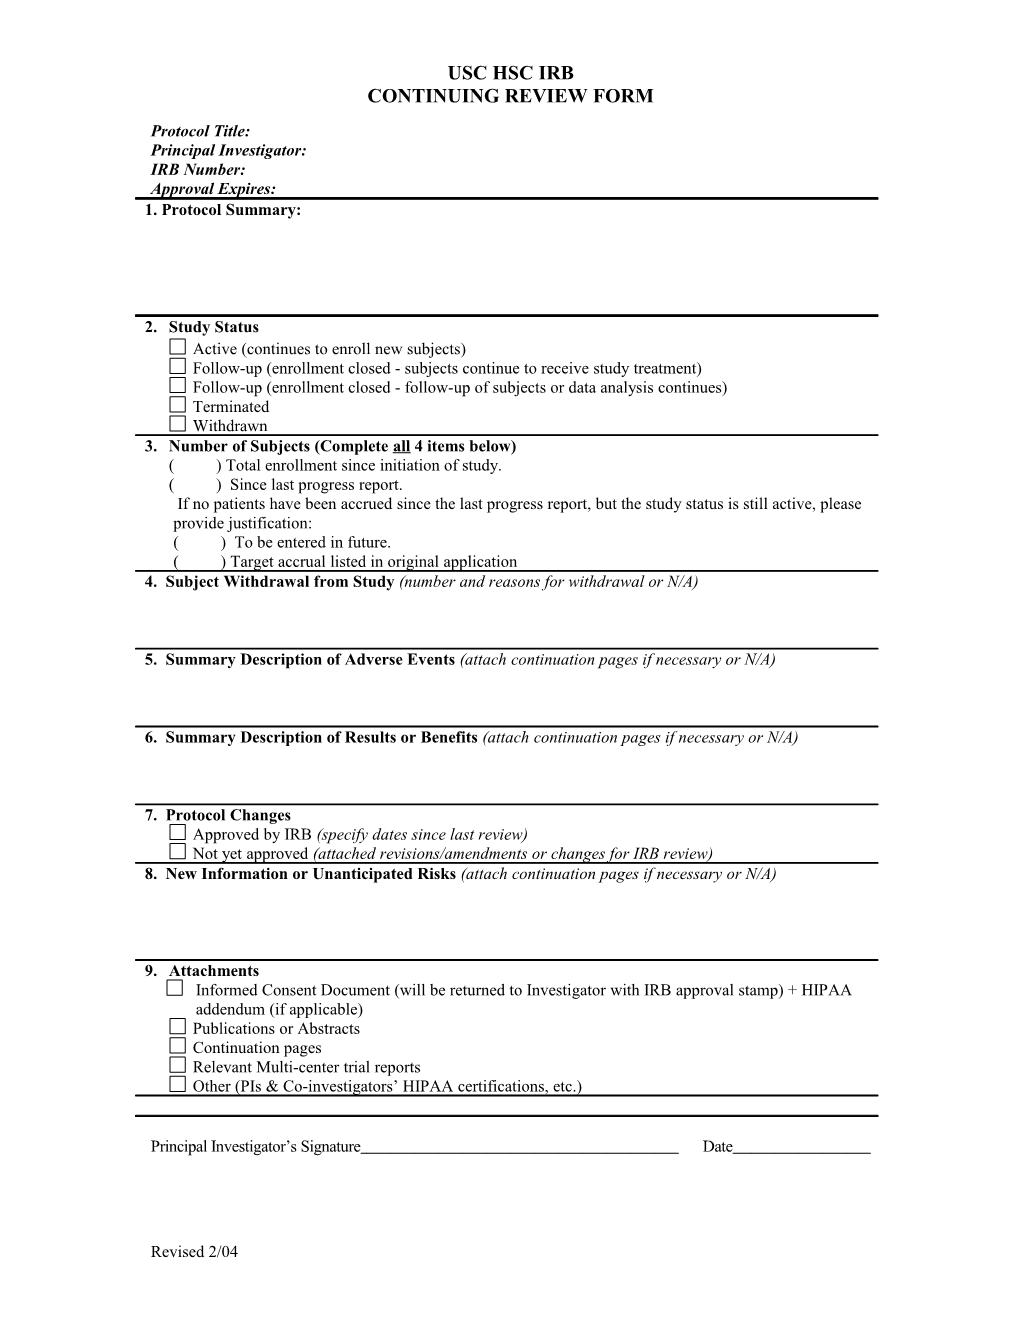 Template Cover Letter for Continuing Review Form